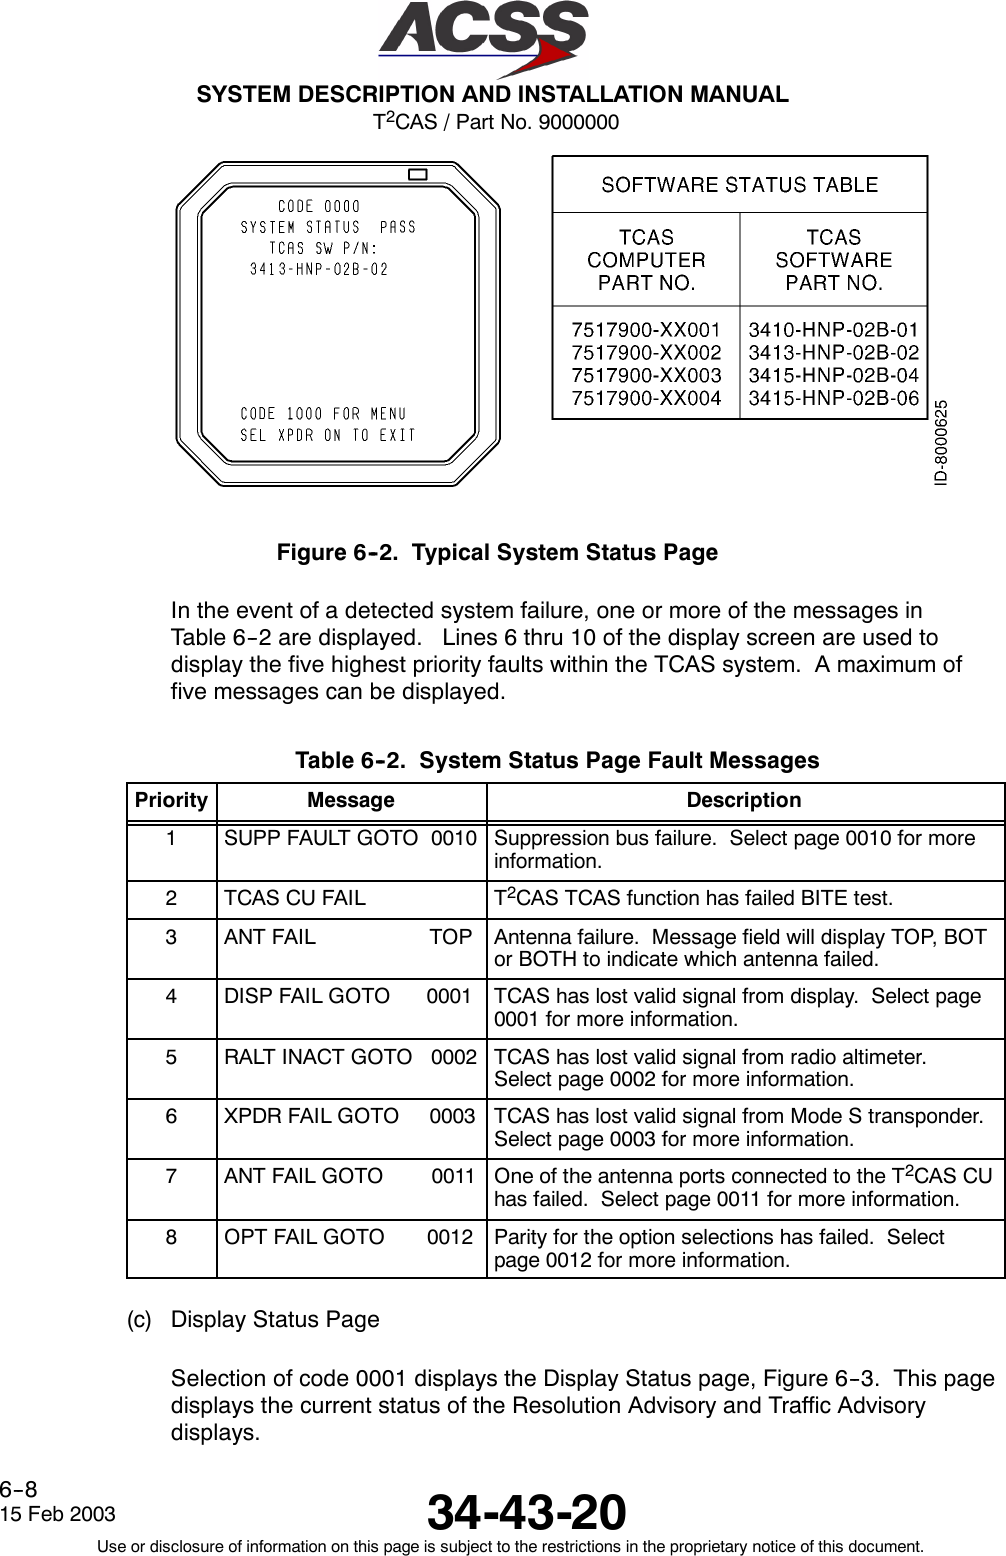 T2CAS / Part No. 9000000SYSTEM DESCRIPTION AND INSTALLATION MANUAL34-43-2015 Feb 2003Use or disclosure of information on this page is subject to the restrictions in the proprietary notice of this document.6--8Figure 6--2. Typical System Status PageIn the event of a detected system failure, one or more of the messages inTable 6--2 are displayed. Lines 6 thru 10 of the display screen are used todisplay the five highest priority faults within the TCAS system. A maximum offive messages can be displayed.Table 6--2. System Status Page Fault MessagesPriority Message Description1SUPP FAULT GOTO 0010 Suppression bus failure. Select page 0010 for moreinformation.2TCAS CU FAIL T2CAS TCAS function has failed BITE test.3ANT FAIL TOP Antenna failure. Message field will display TOP, BOTor BOTH to indicate which antenna failed.4DISP FAIL GOTO 0001 TCAS has lost valid signal from display. Select page0001 for more information.5RALT INACT GOTO 0002 TCAS has lost valid signal from radio altimeter.Select page 0002 for more information.6XPDR FAIL GOTO 0003 TCAS has lost valid signal from Mode S transponder.Select page 0003 for more information.7ANT FAIL GOTO 0011 One of the antenna ports connected to the T2CAS CUhas failed. Select page 0011 for more information.8OPT FAIL GOTO 0012 Parity for the option selections has failed. Selectpage 0012 for more information.(c) Display Status PageSelection of code 0001 displays the Display Status page, Figure 6--3. This pagedisplays the current status of the Resolution Advisory and Traffic Advisorydisplays.